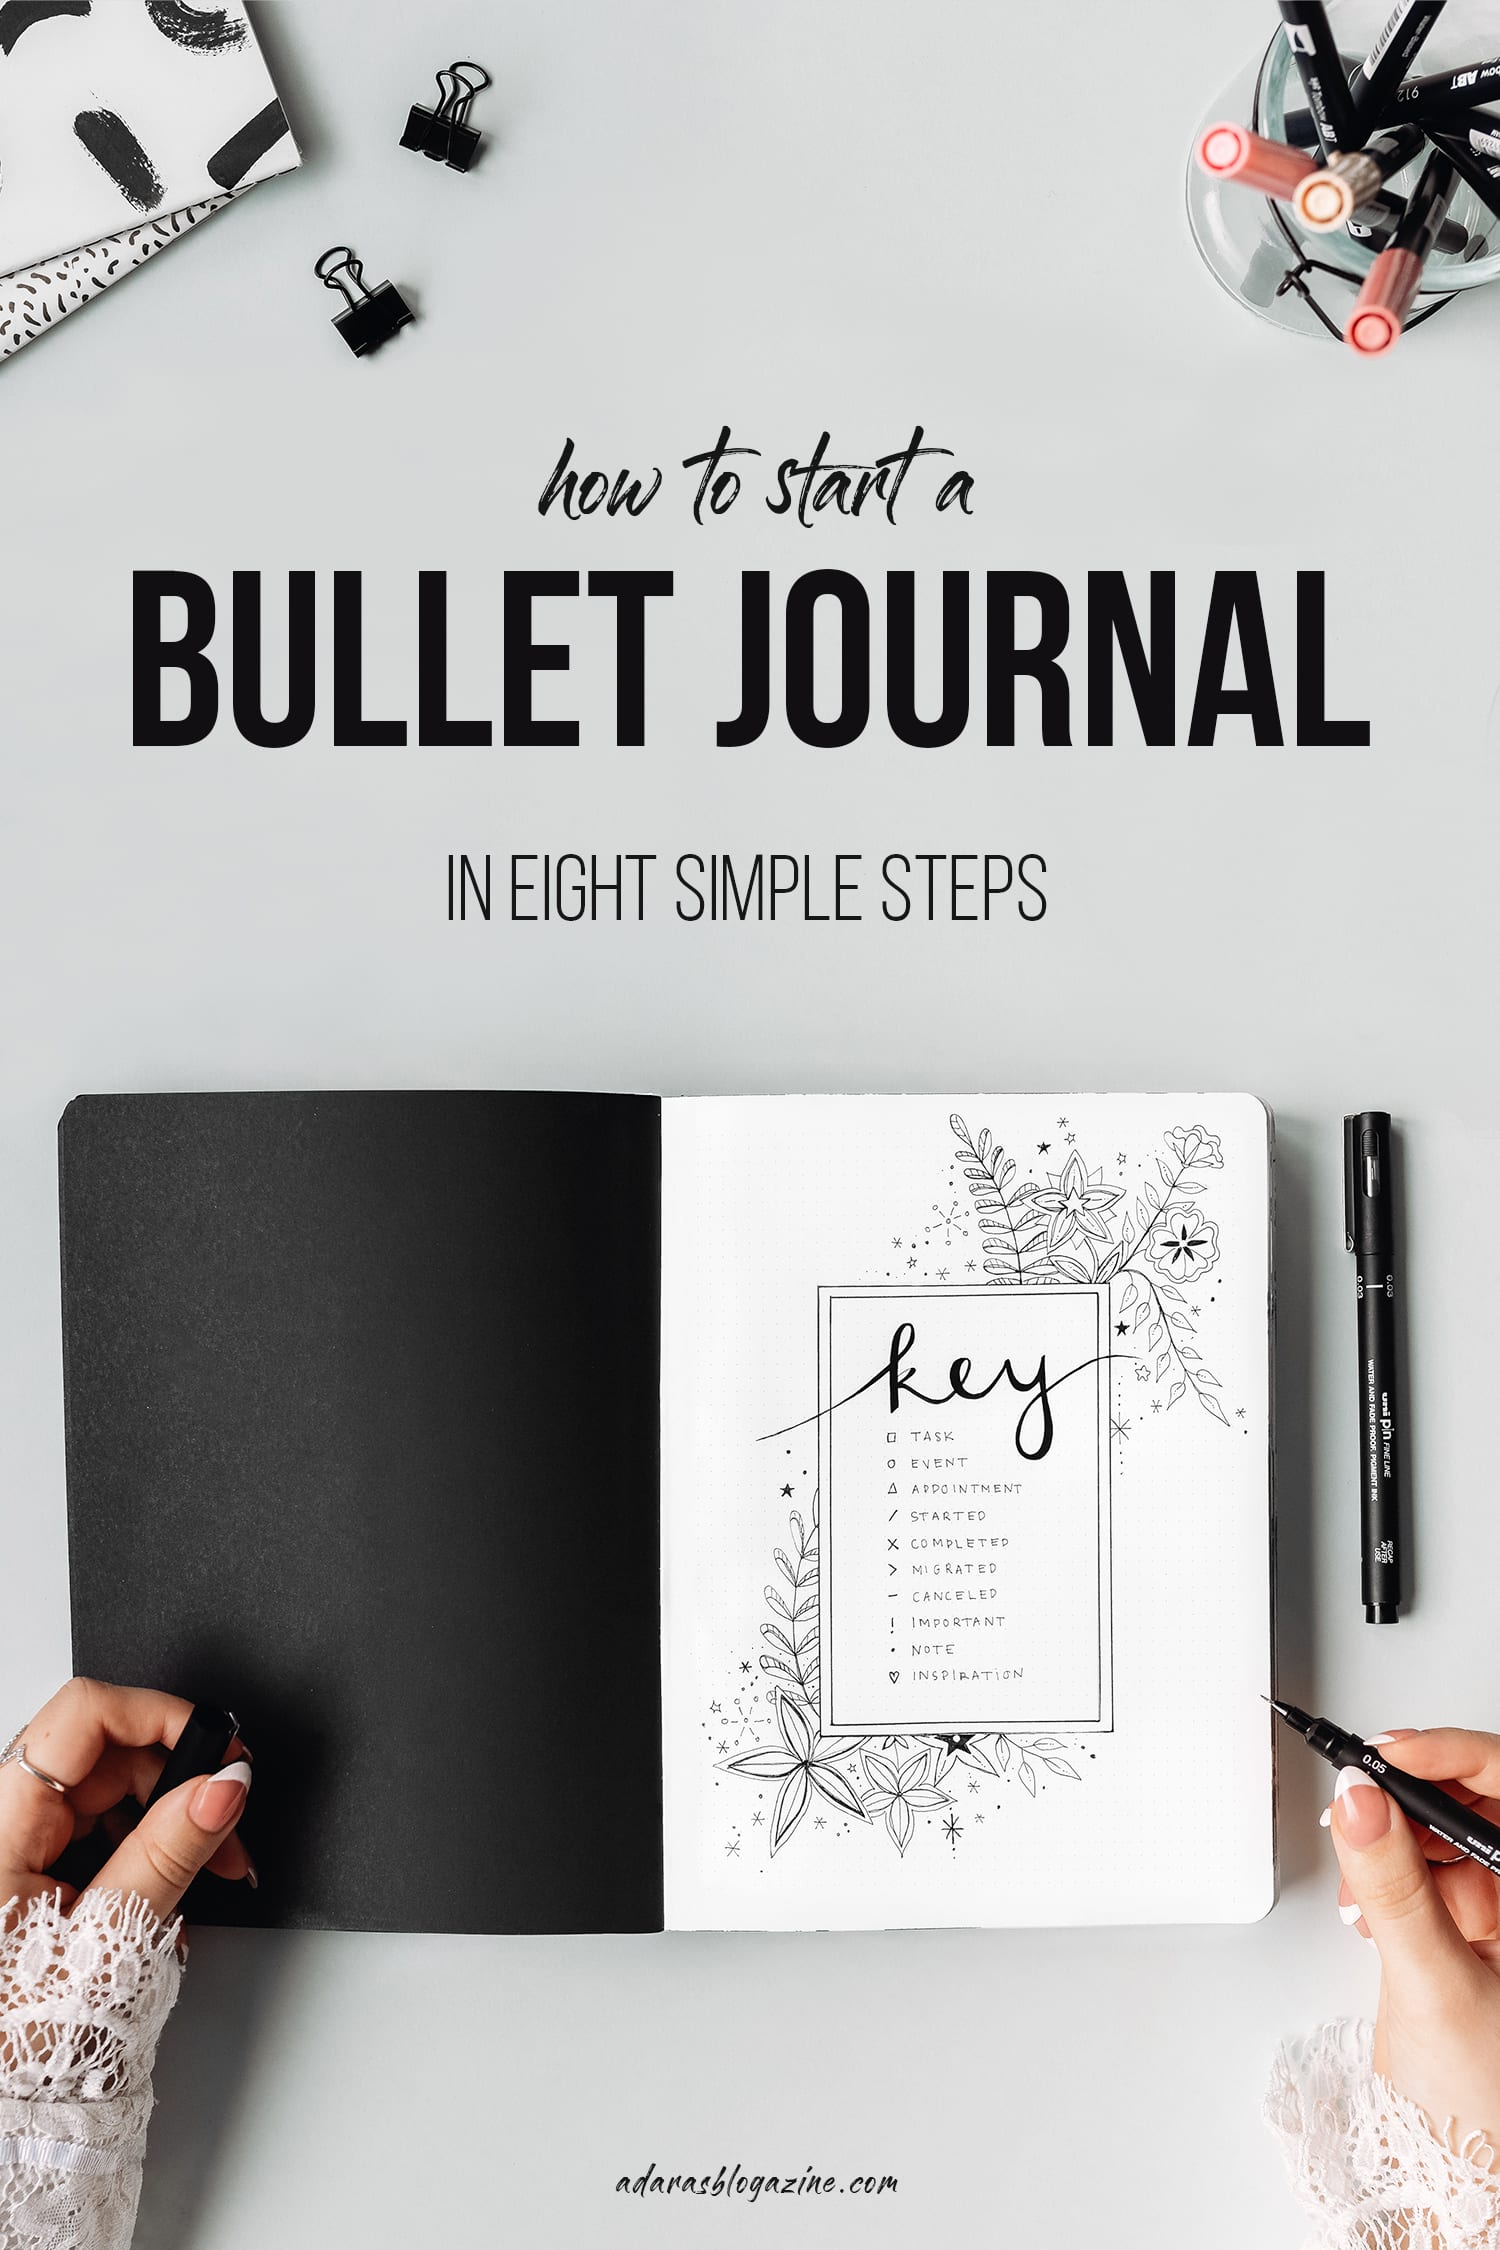 How to Start a Bullet Journal - in 8 Easy Steps